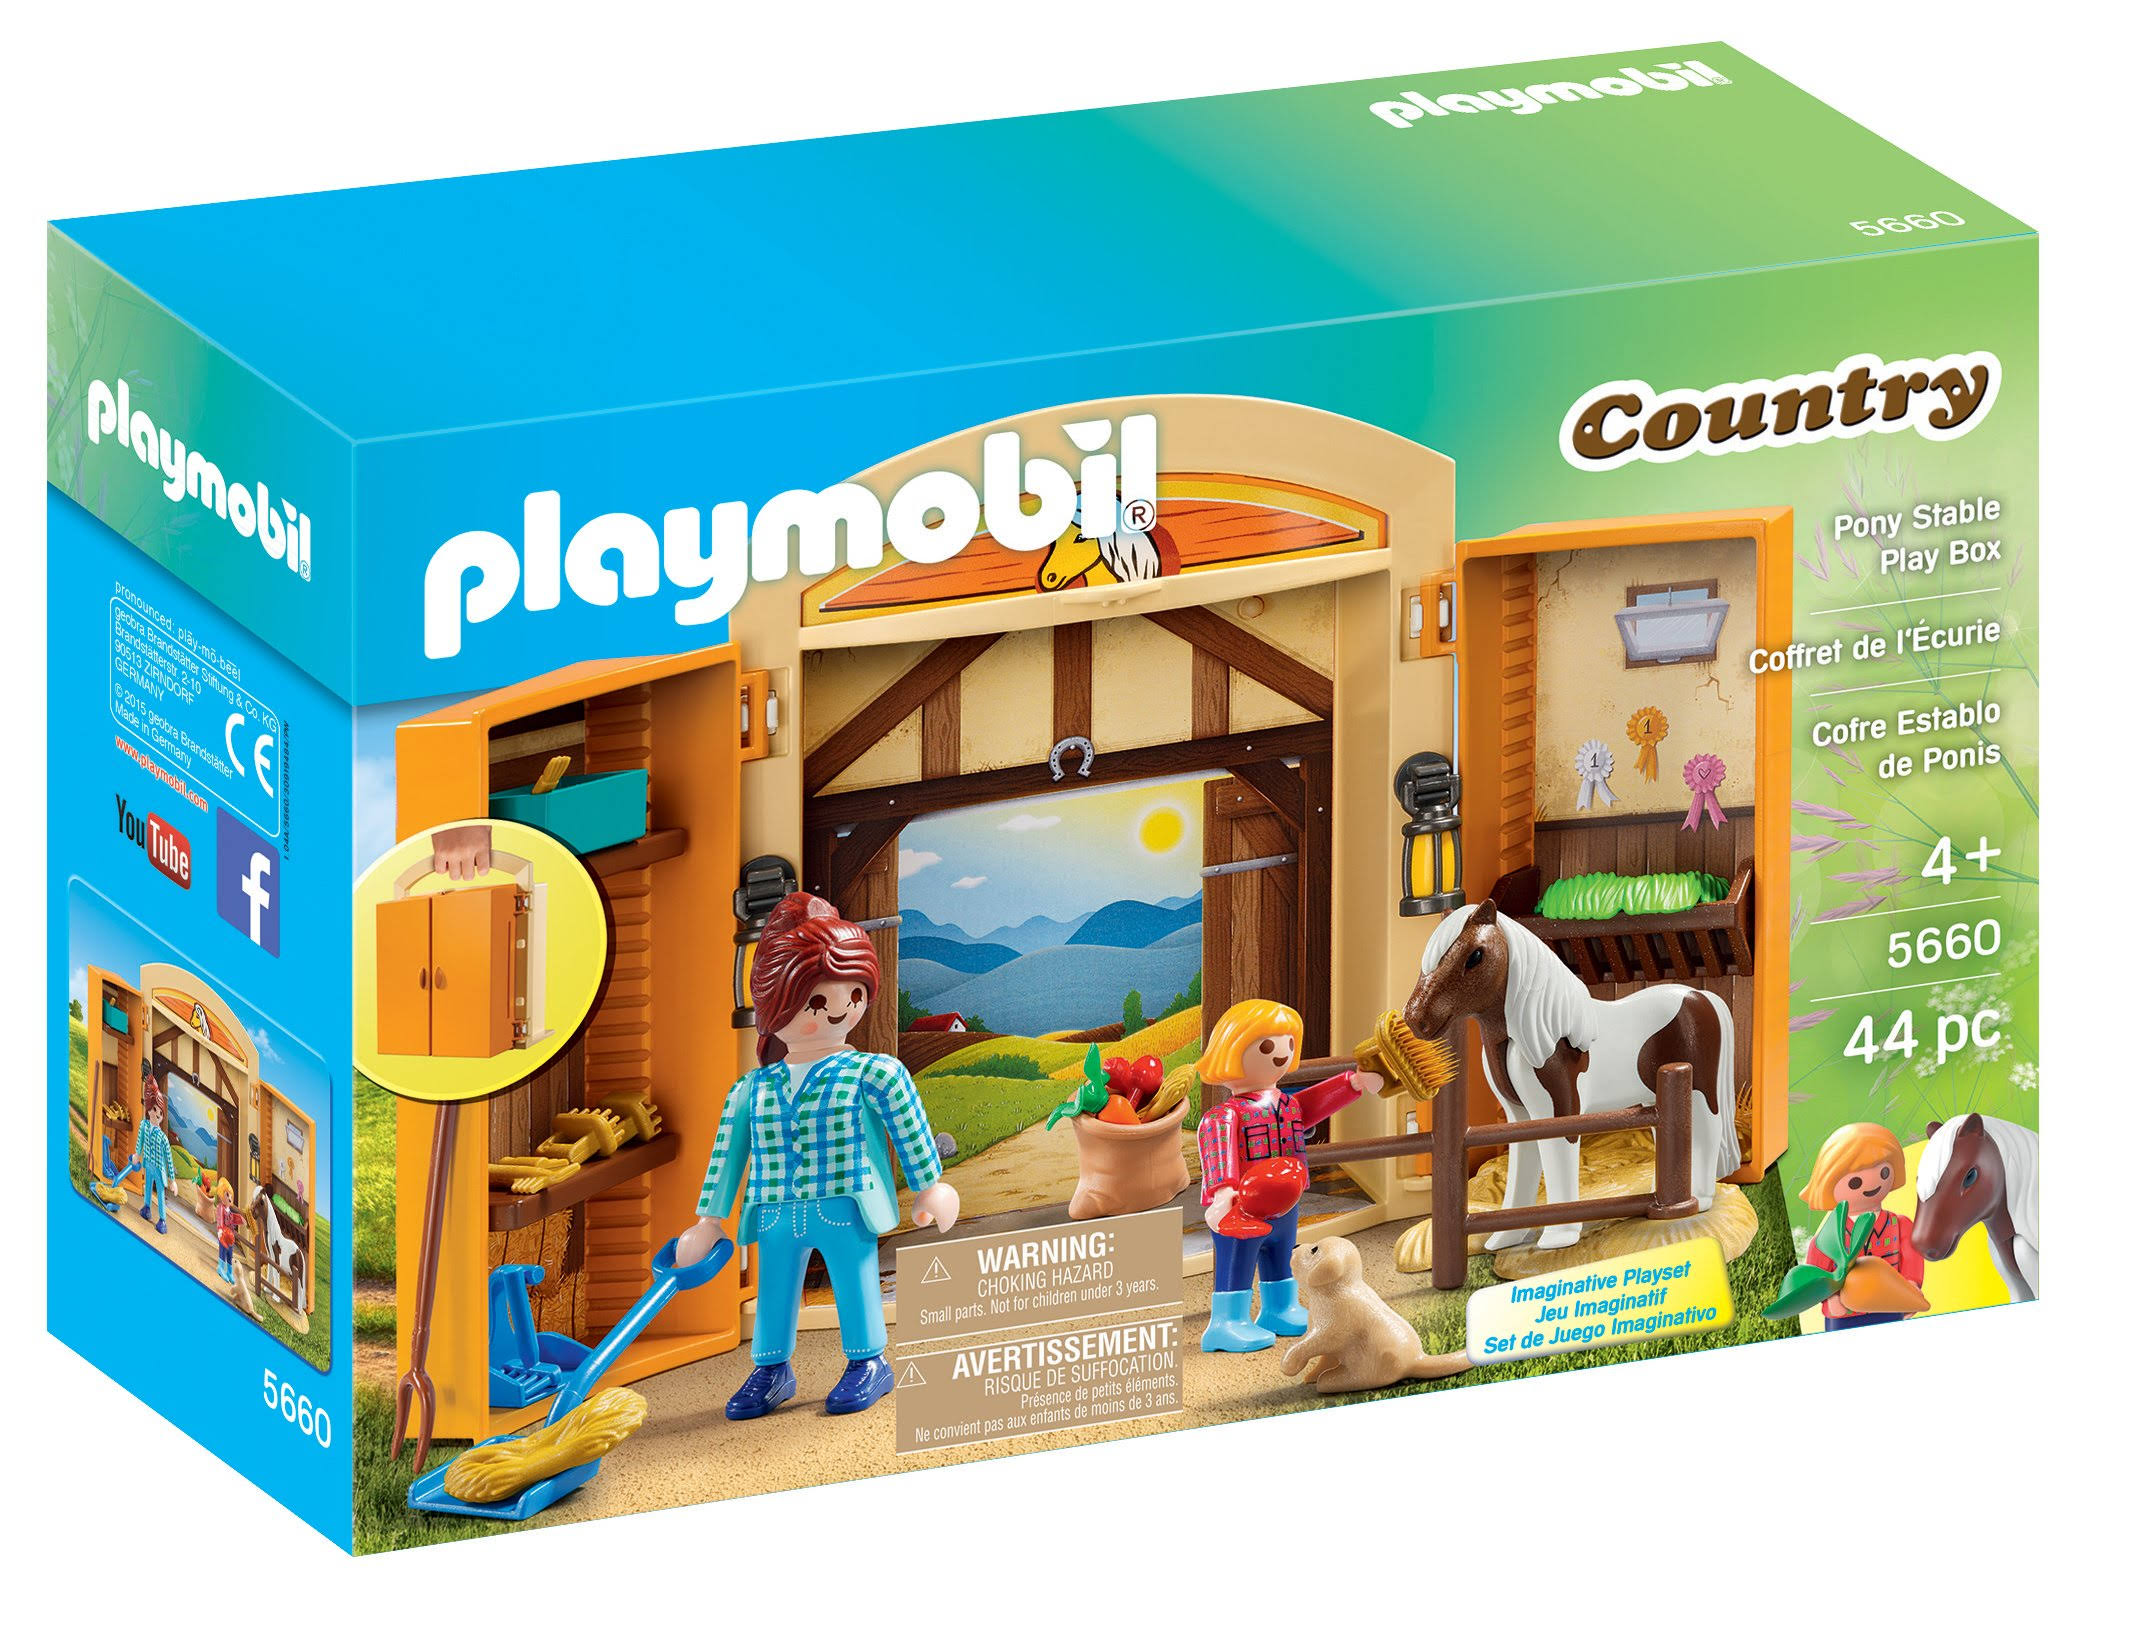 Playmobil 5660 Country Pony Stable Play Box